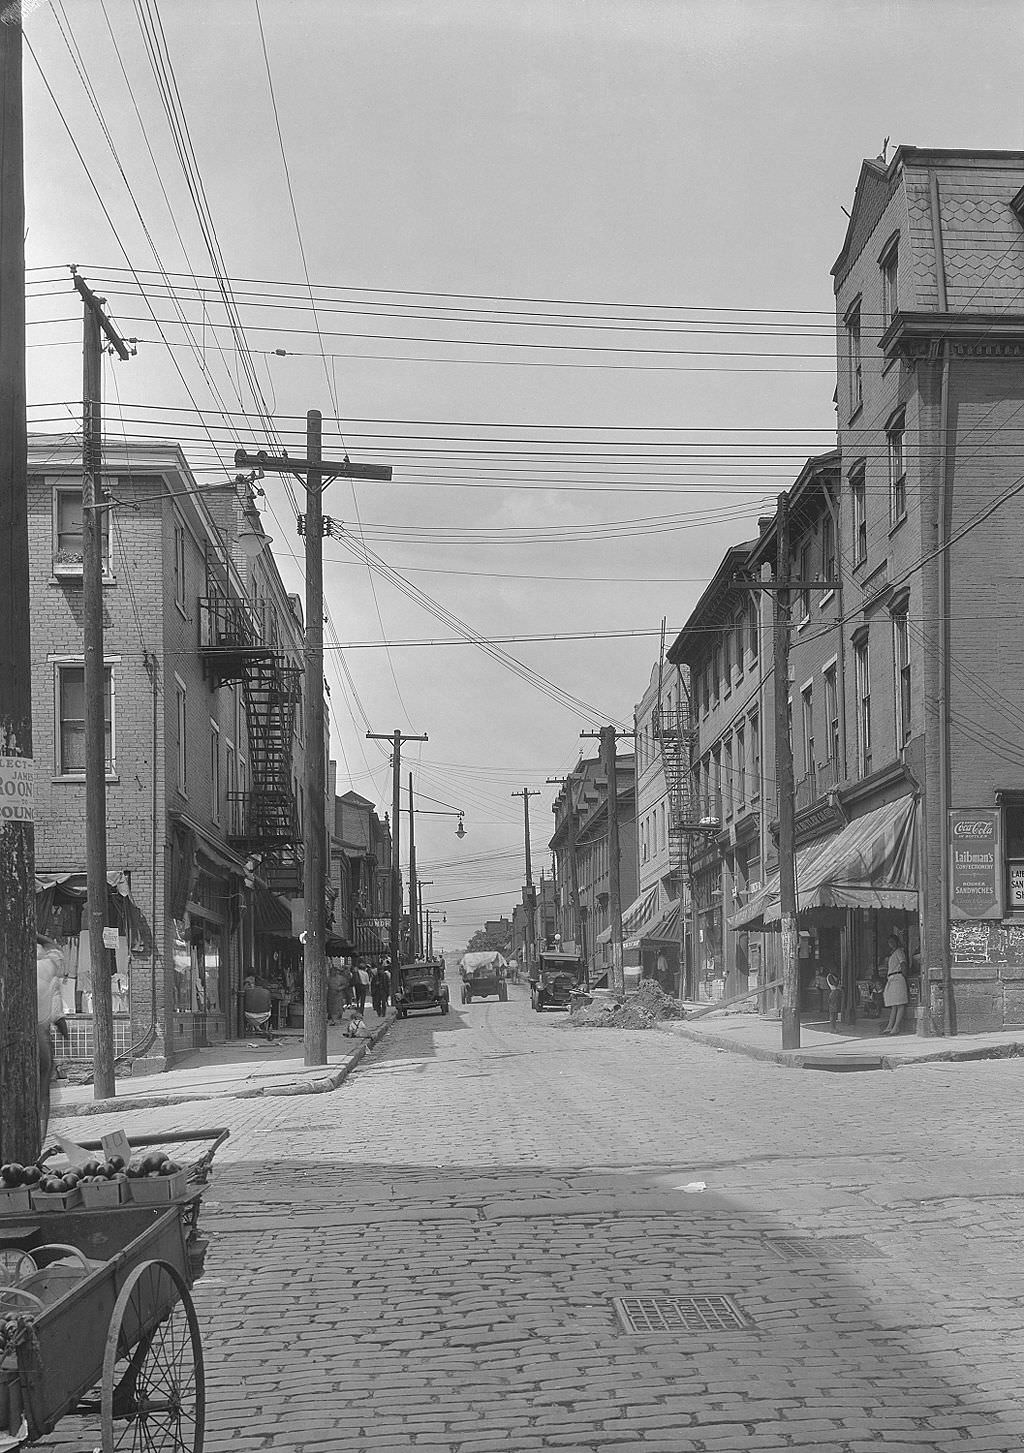 Logan Street from Epiphany, Laibman's Confectionery on right, 1931